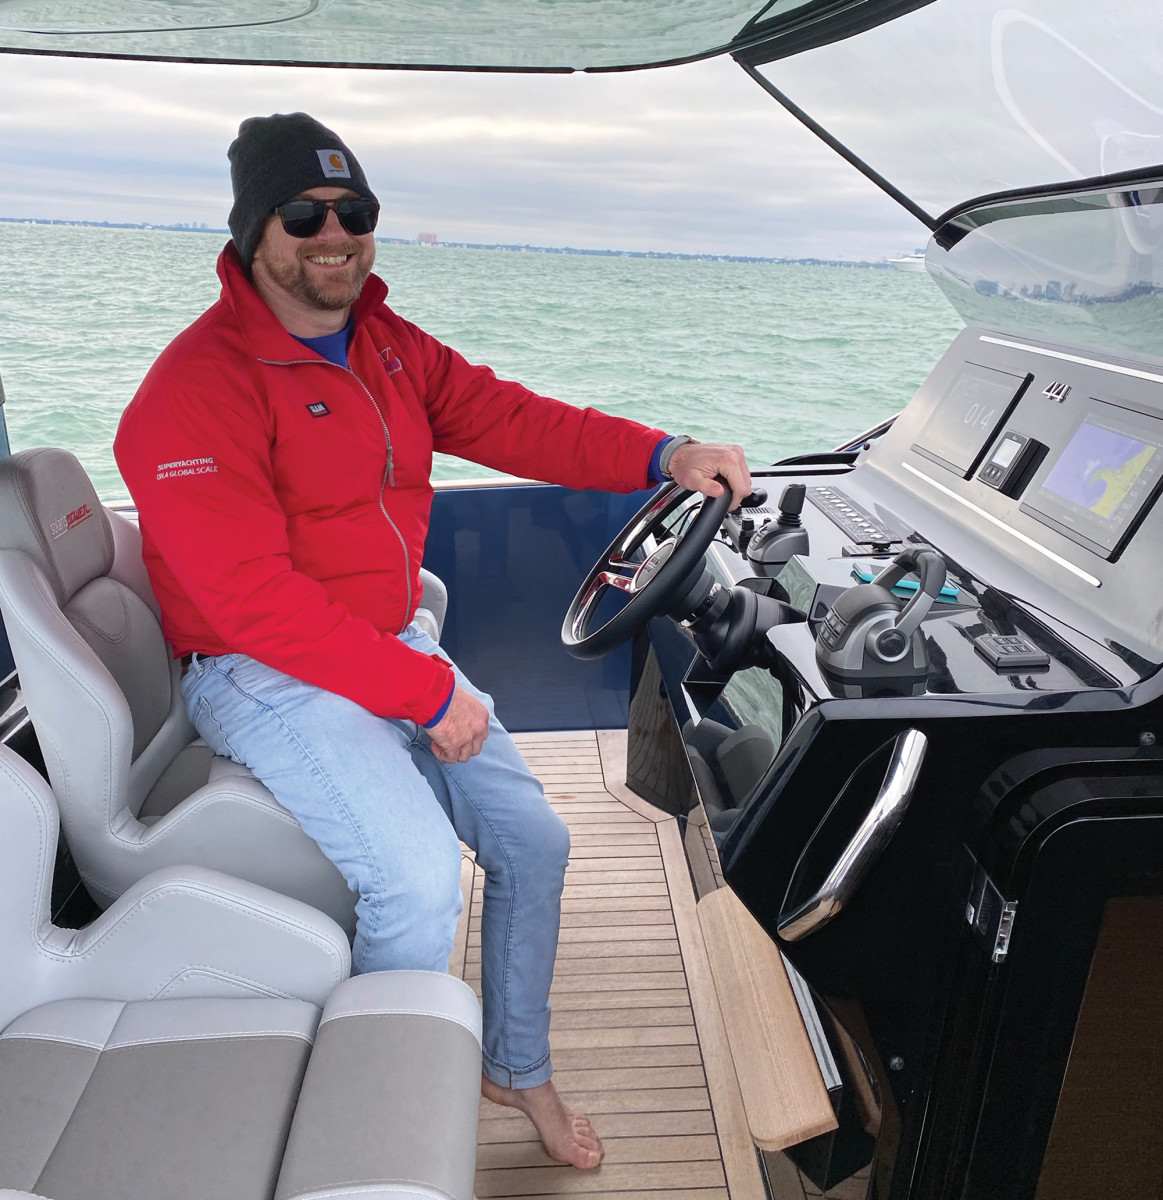 The author at the helm of the Solaris 44 Open on a blustery day in Miami.